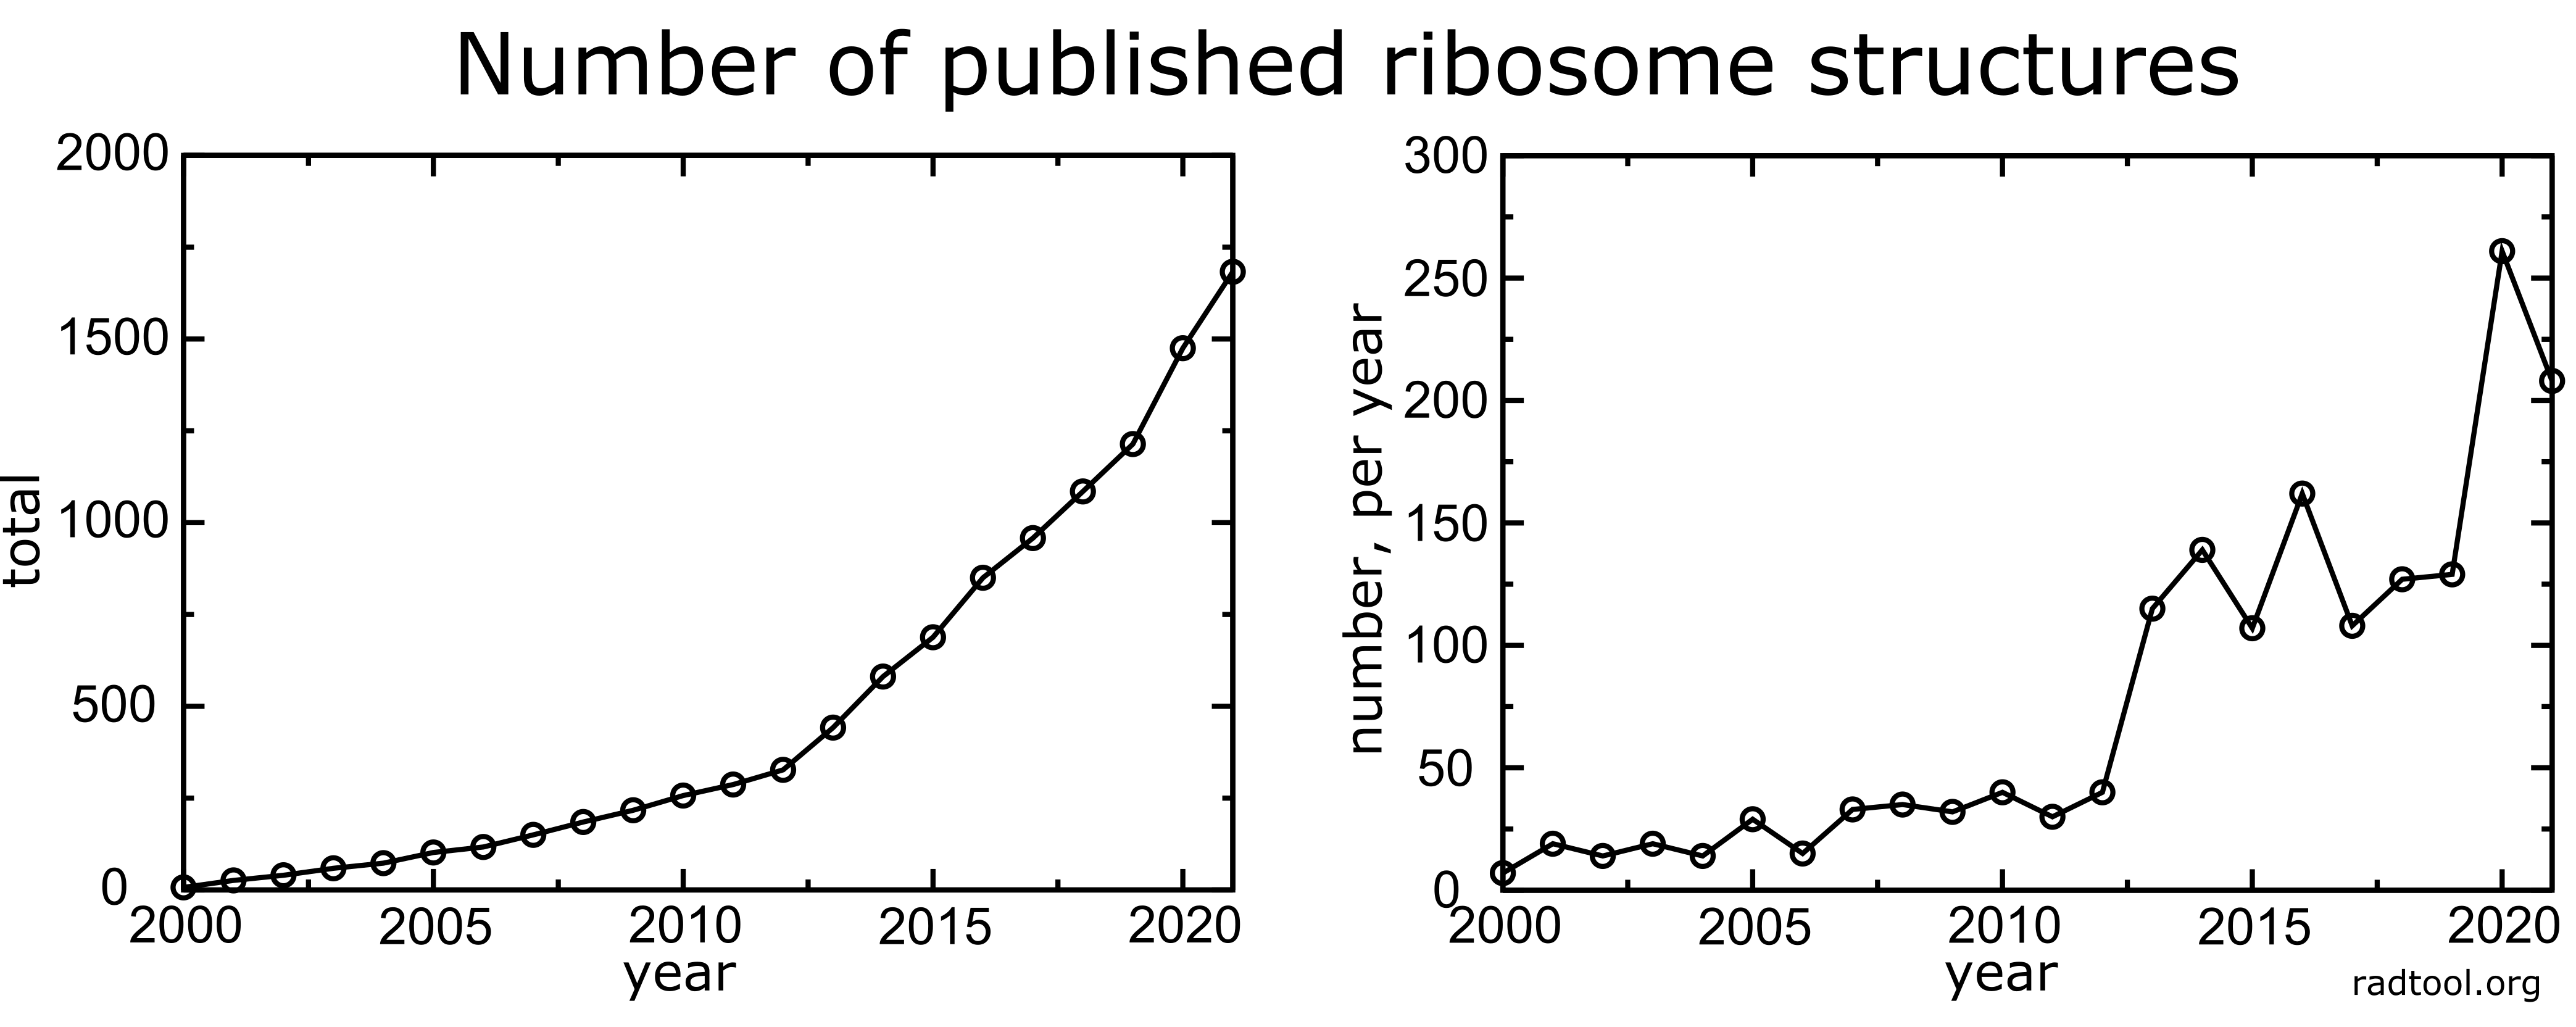 Number of ribosomes per year